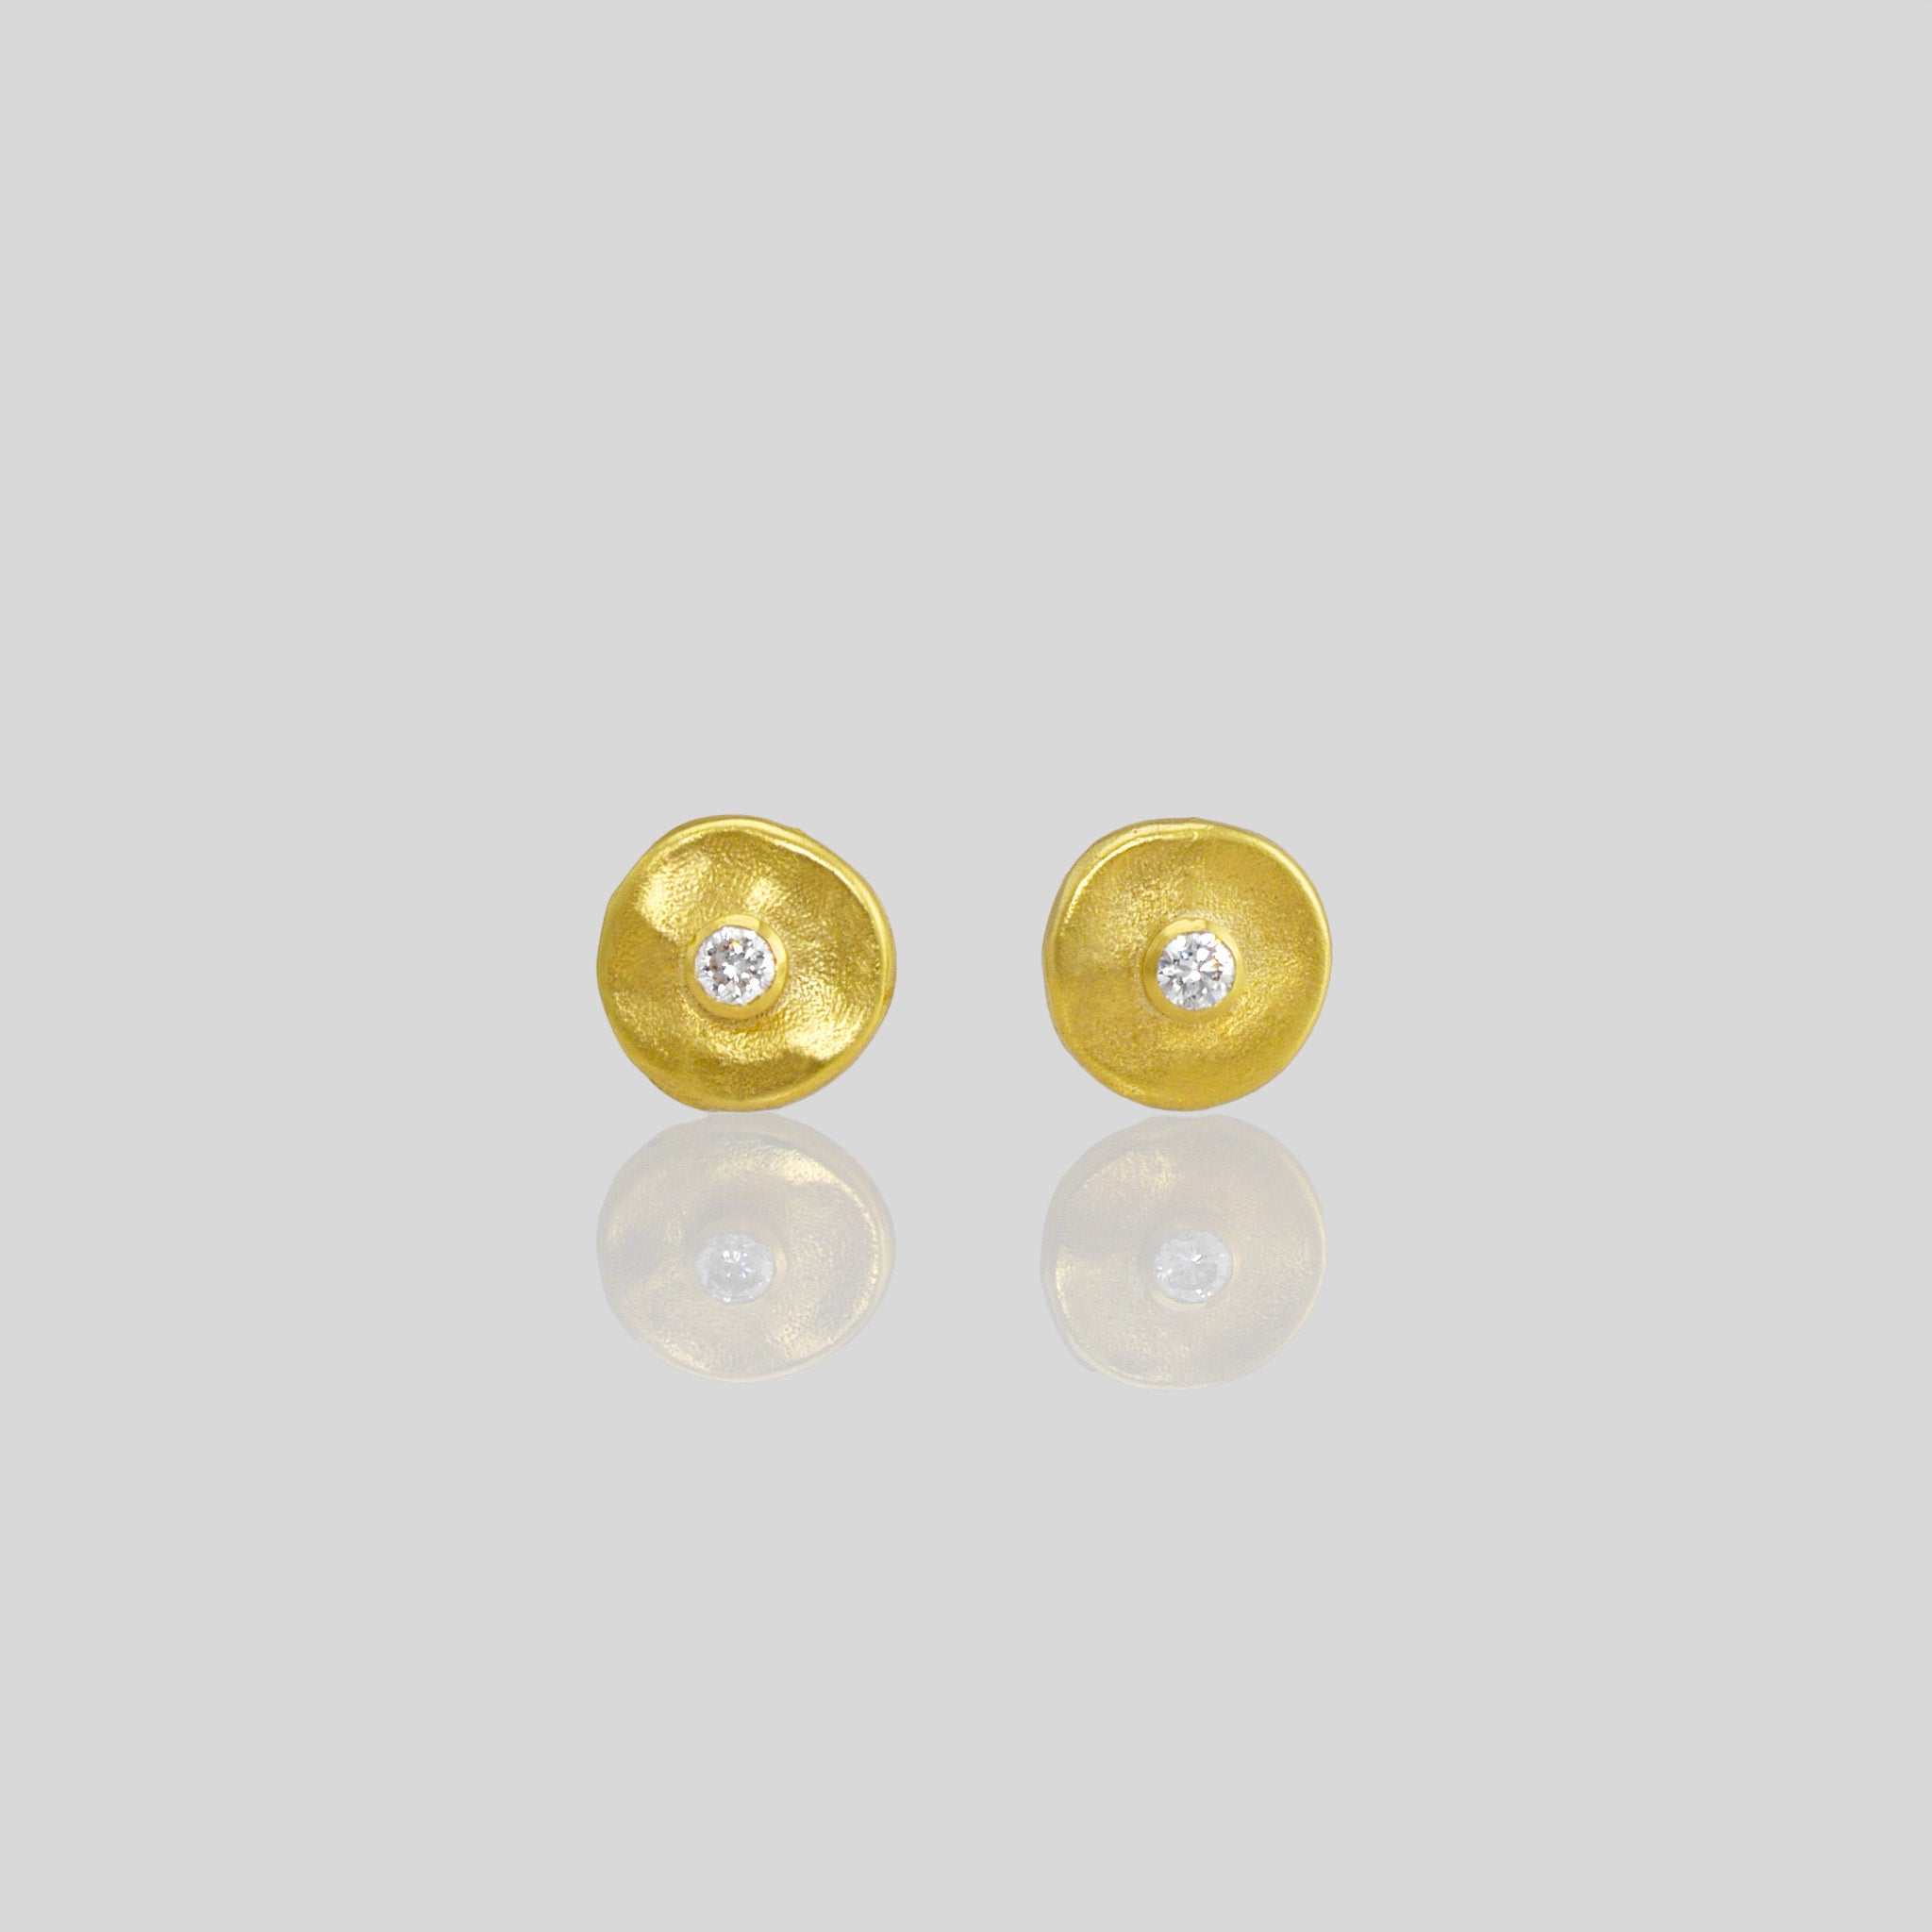 Close up of hand-crafted gold stud earrings with a round amorphous shape, featuring a diamond set in the center.